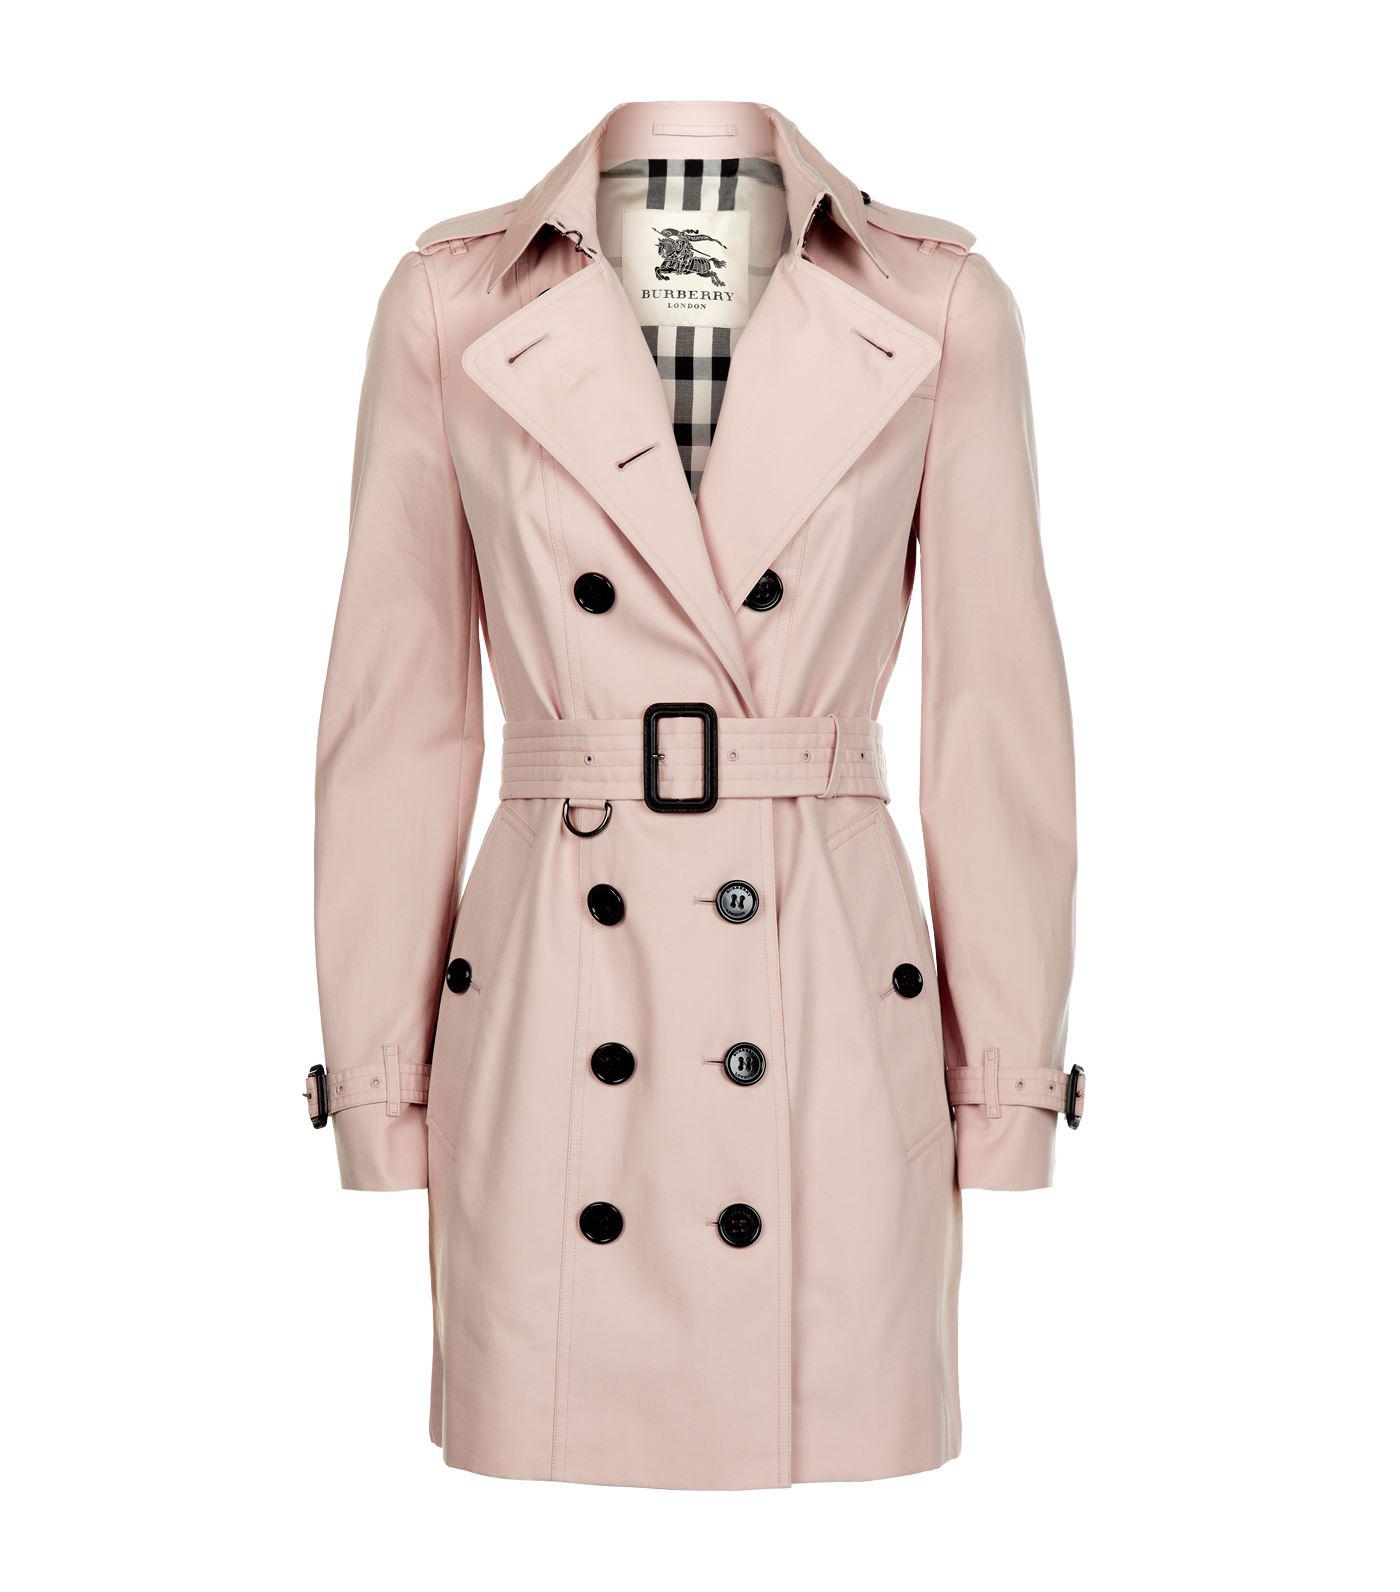 Burberry Pink Trench Coat - www.inf-inet.com